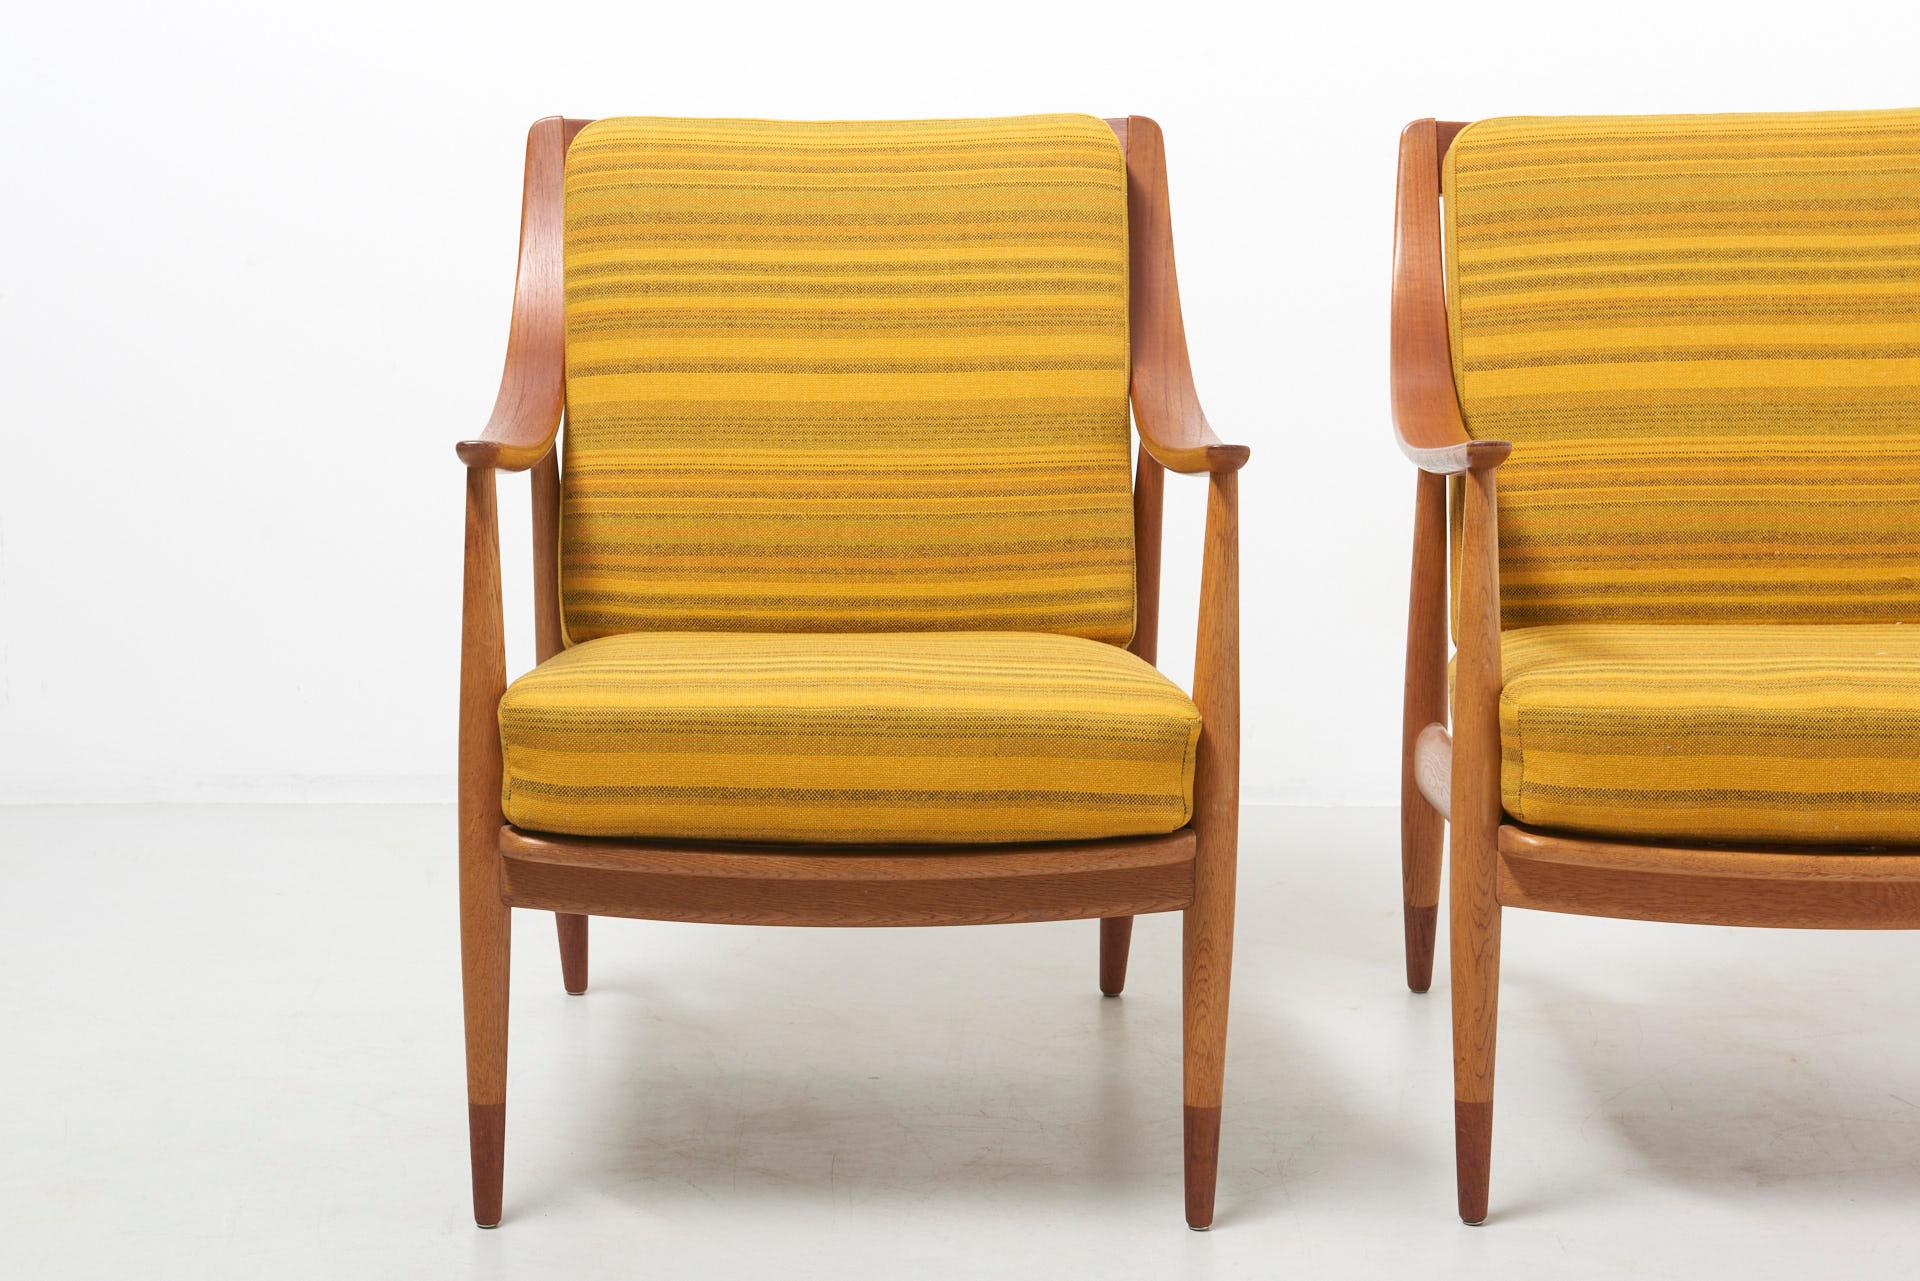 A pair of easy chairs designed in 1953 by Peter Hvidt and Orla Mølgaard-Nielsen. Model FD 144, made by France & Daverkosen. The frames are made of oak with parts in teak. Original cushions, with the original fabric. Excellent condition.